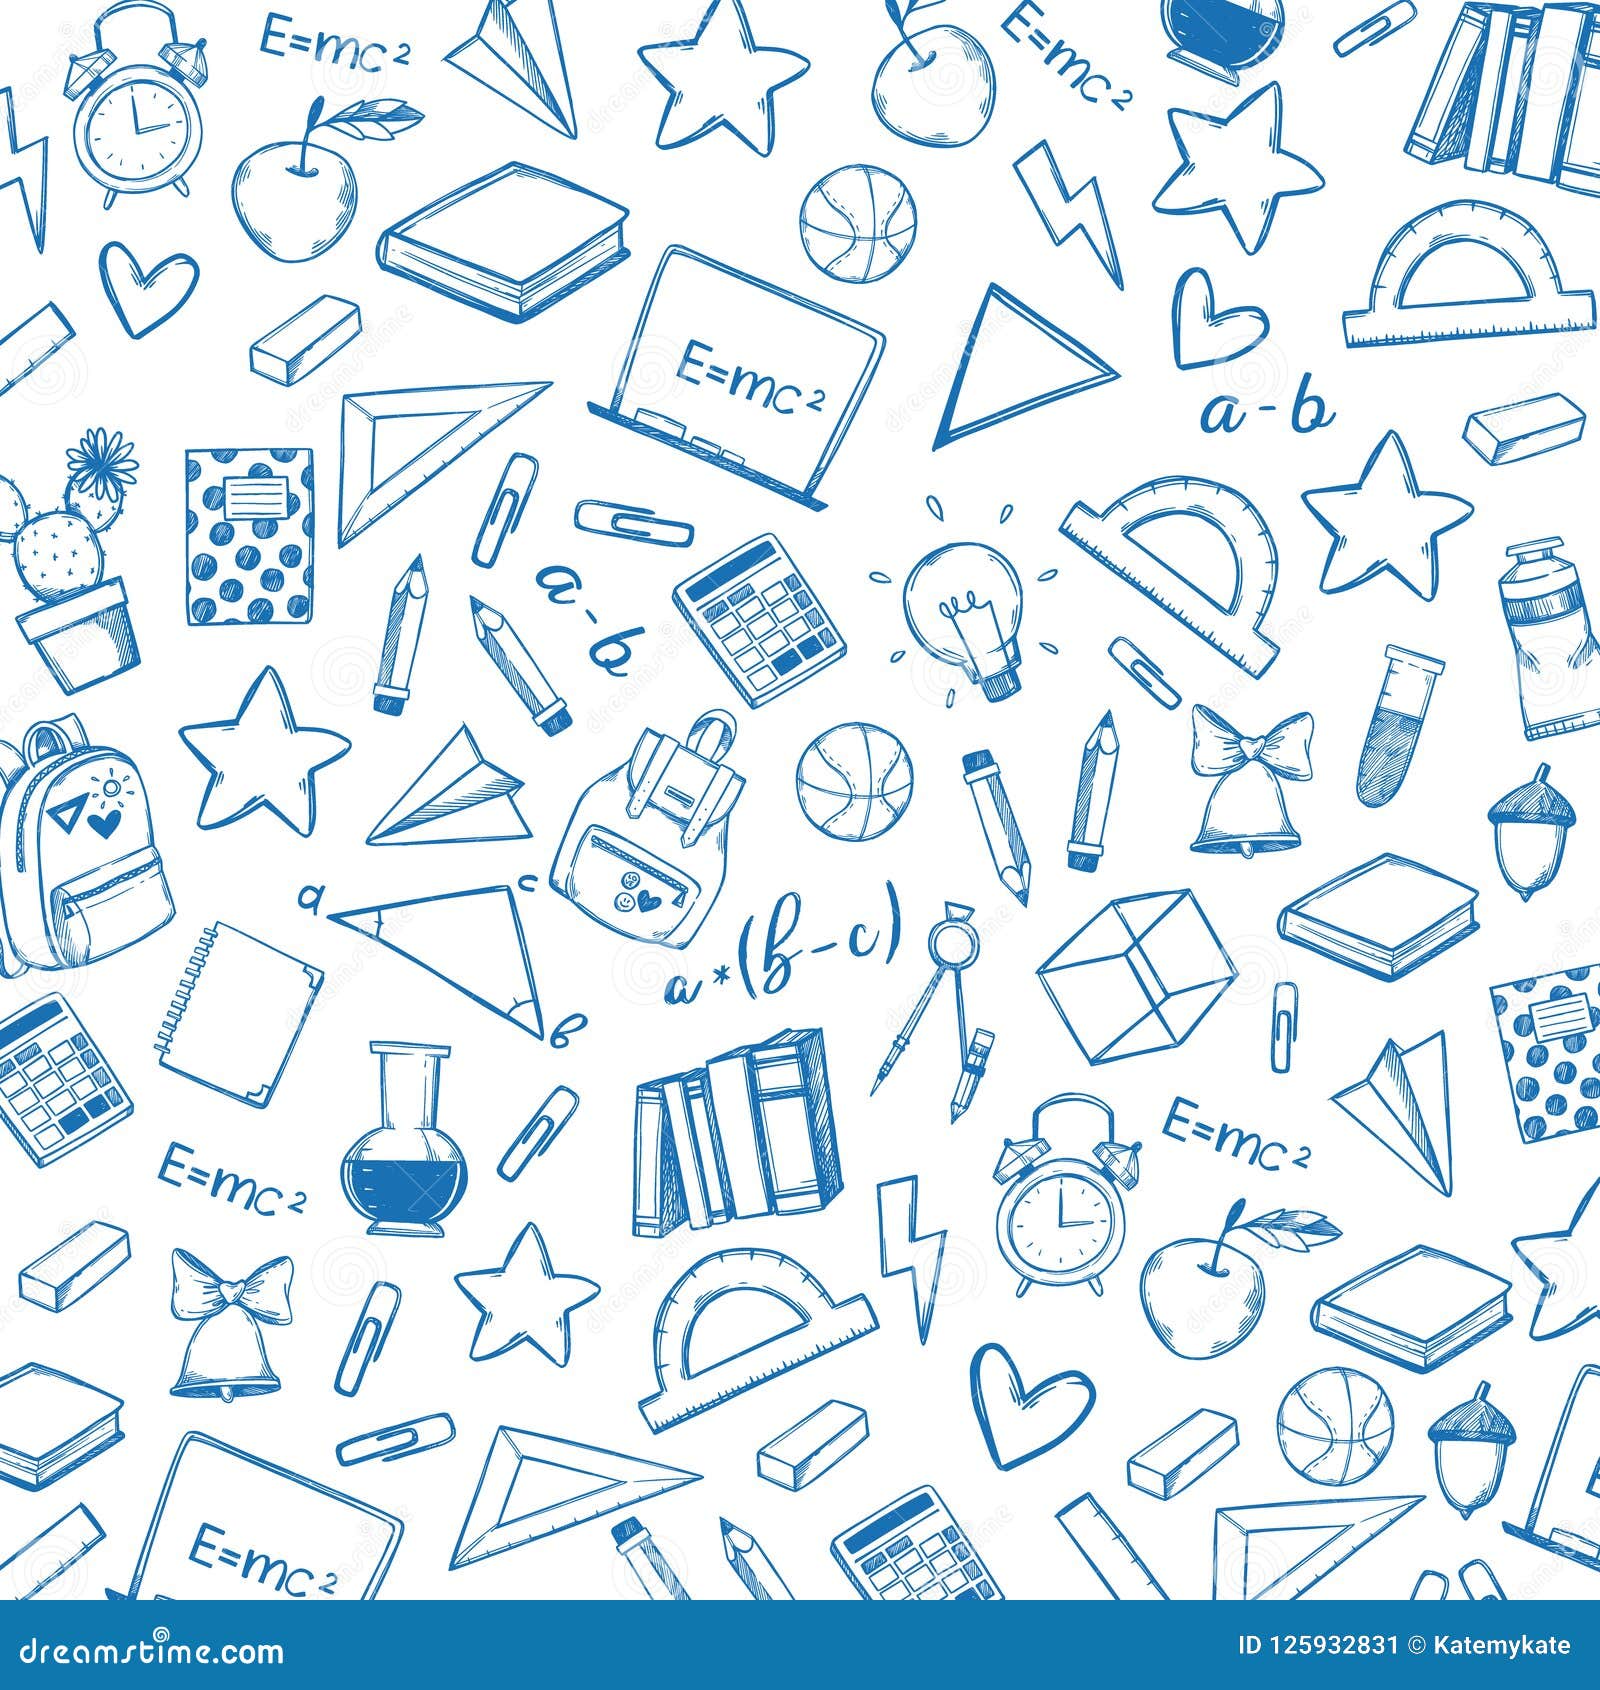 School Supplies And Education Design Elements Isolated On White Background  Hand Drawn Sketch Vector Illustration Stock Illustration - Download Image  Now - iStock